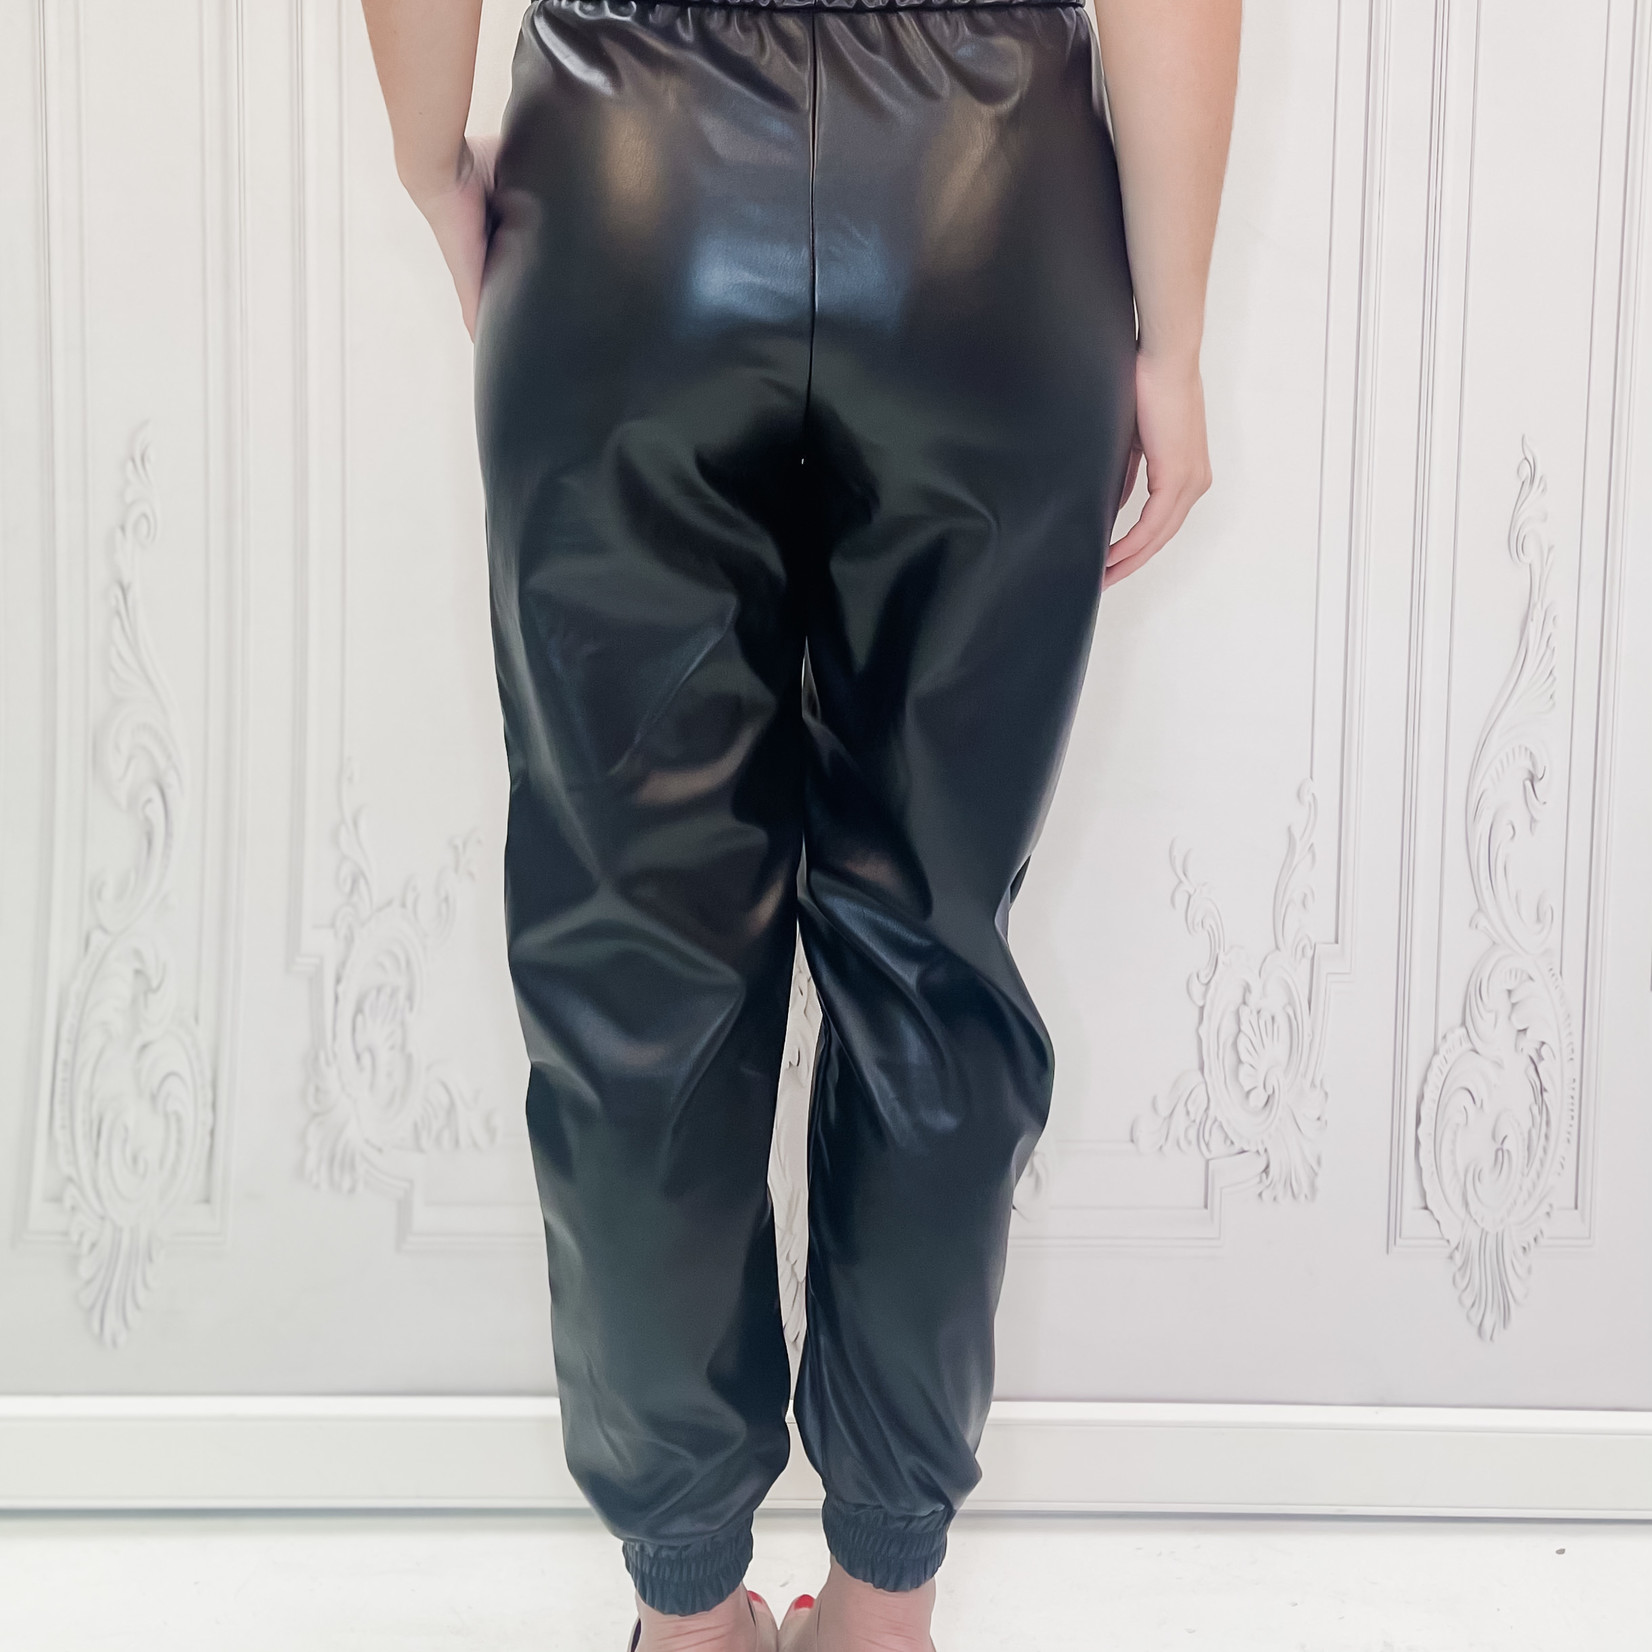 Lily paperbag pleather pants